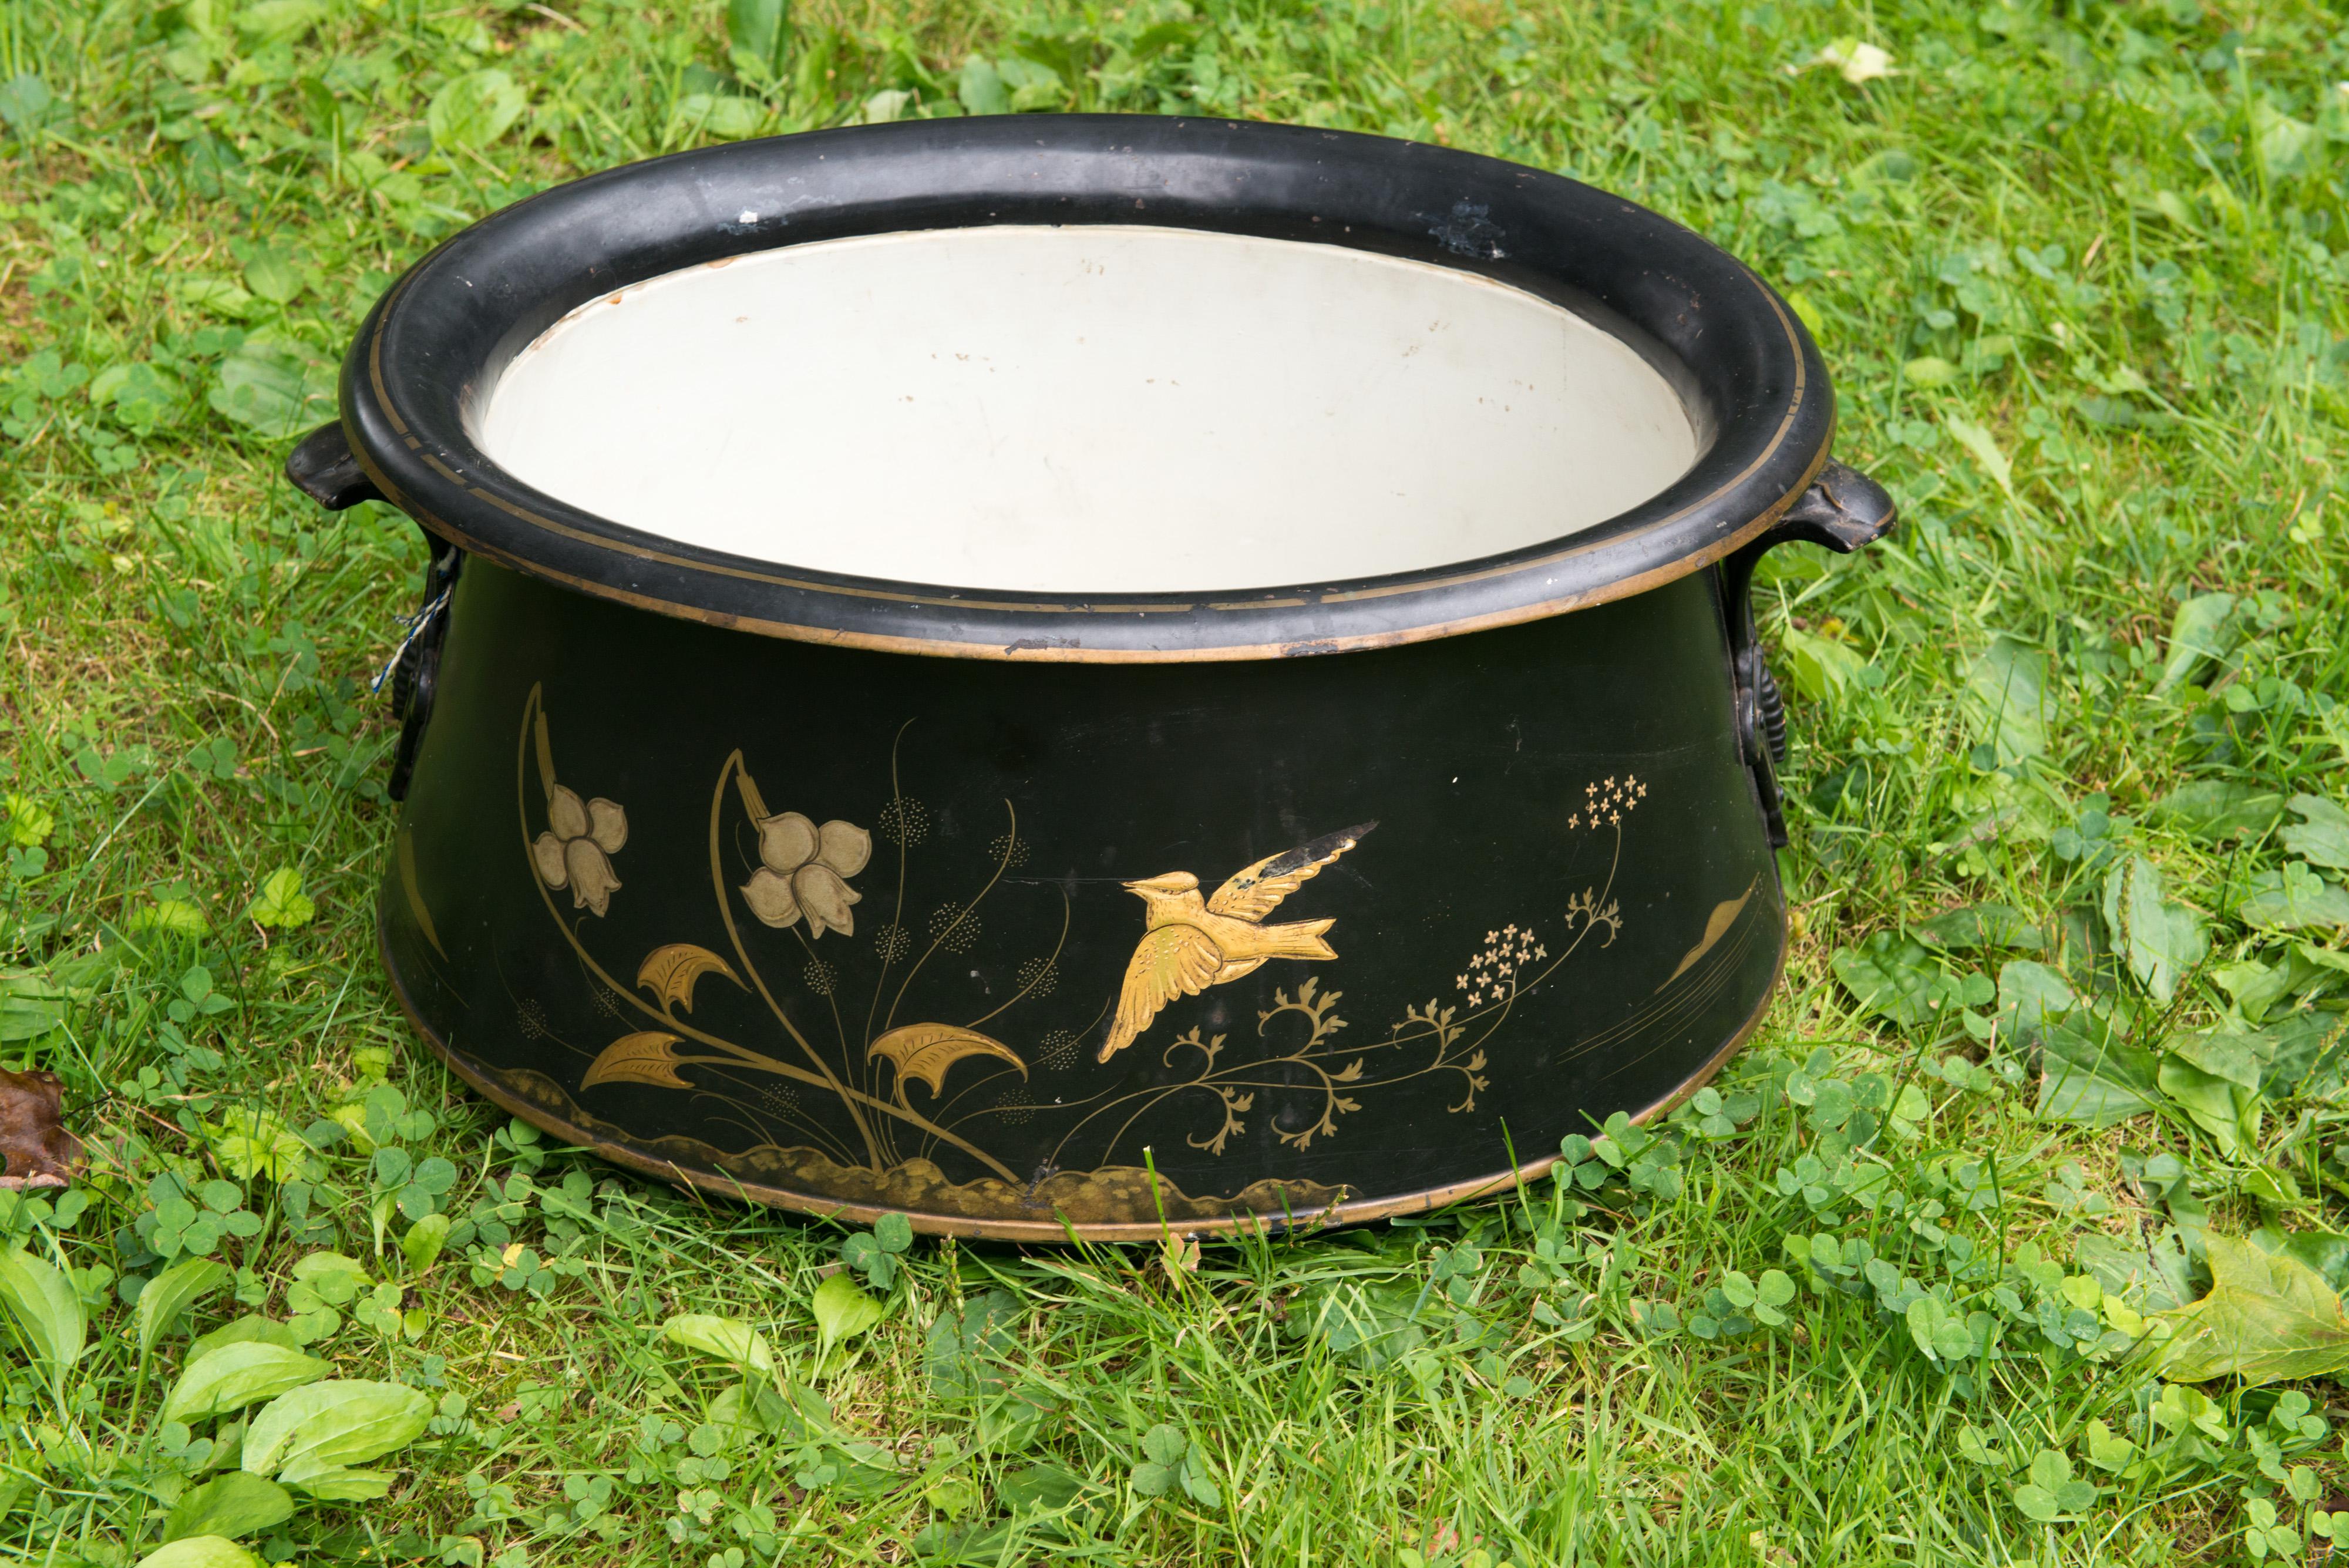 Late Victorian, Eastlake style large black tole planter with gold bird and flower designs.
Signed: Henry Loveridge & Co. Merridale Works Wolverhampton 04988 
Round metal medallion: Clifton